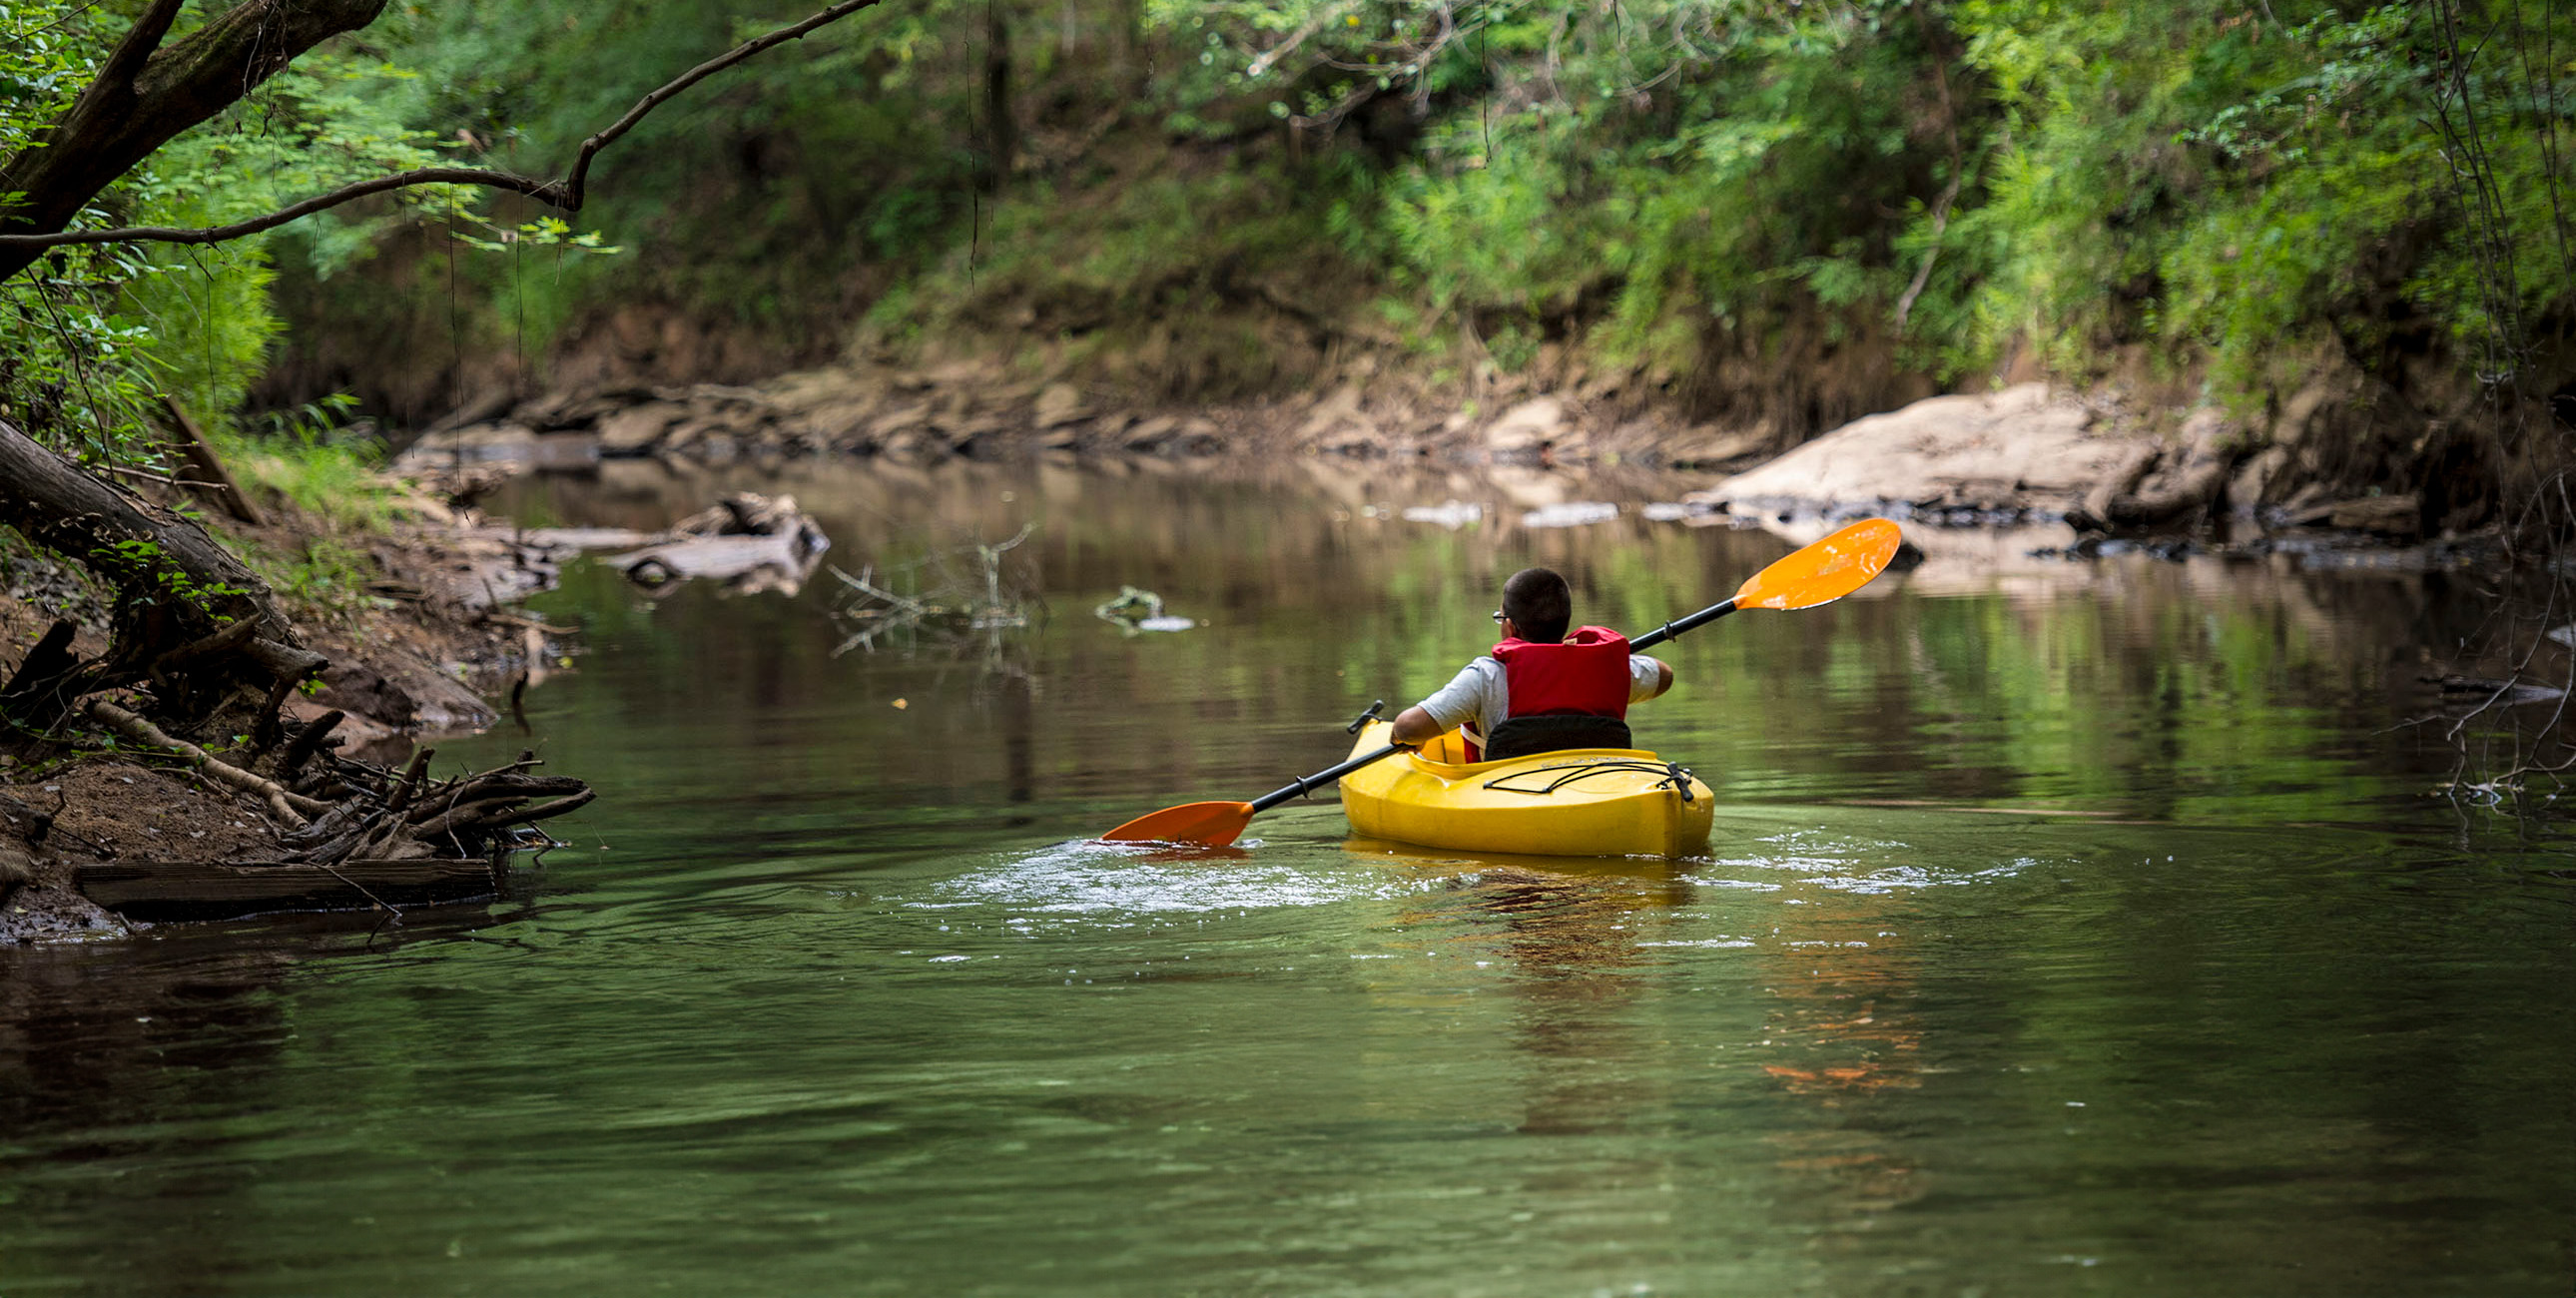 A person in a kayak on a river surrounded by dense vegetation.